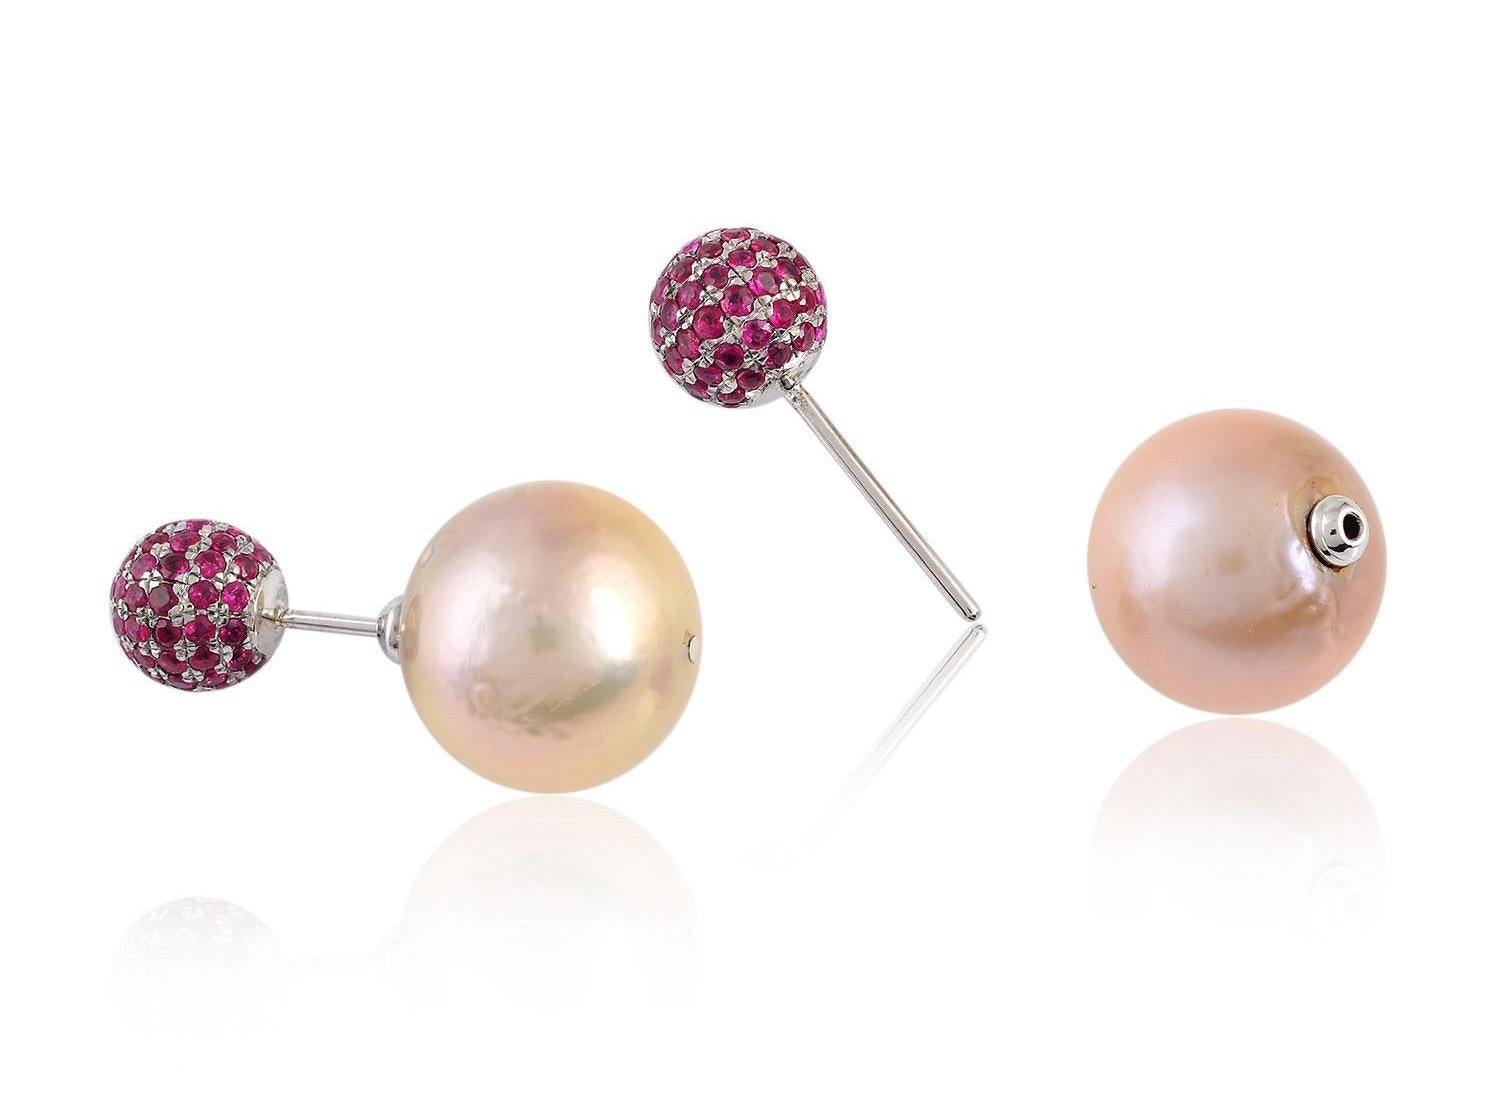 Handcrafted from 18-karat gold and sterling silver, this stud earrings is set with 2.05 carats ruby and 39 carats of pearl.

FOLLOW  MEGHNA JEWELS storefront to view the latest collection & exclusive pieces.  Meghna Jewels is proudly rated as a Top